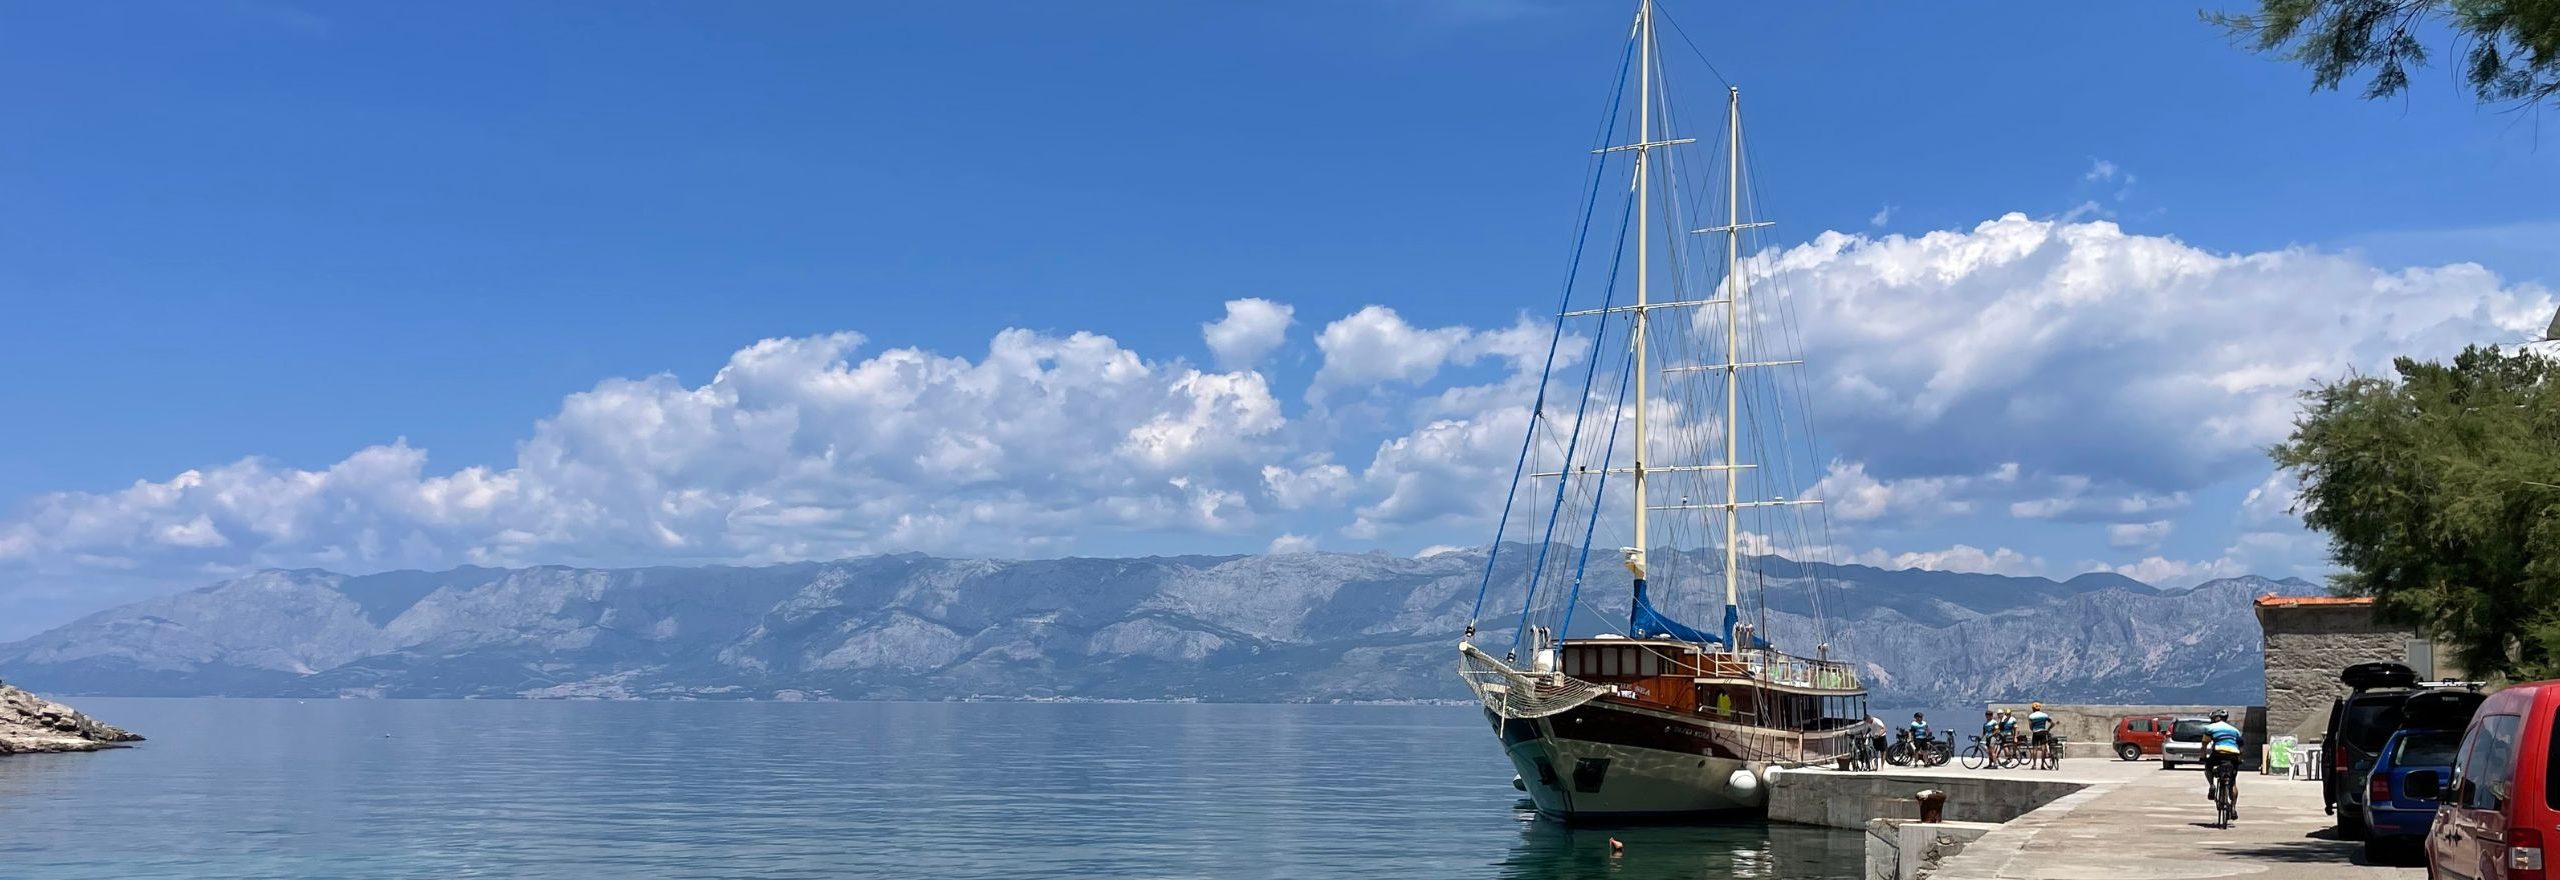 The Tajna Mora - our boat while on this bike and boat tour in Croatia.